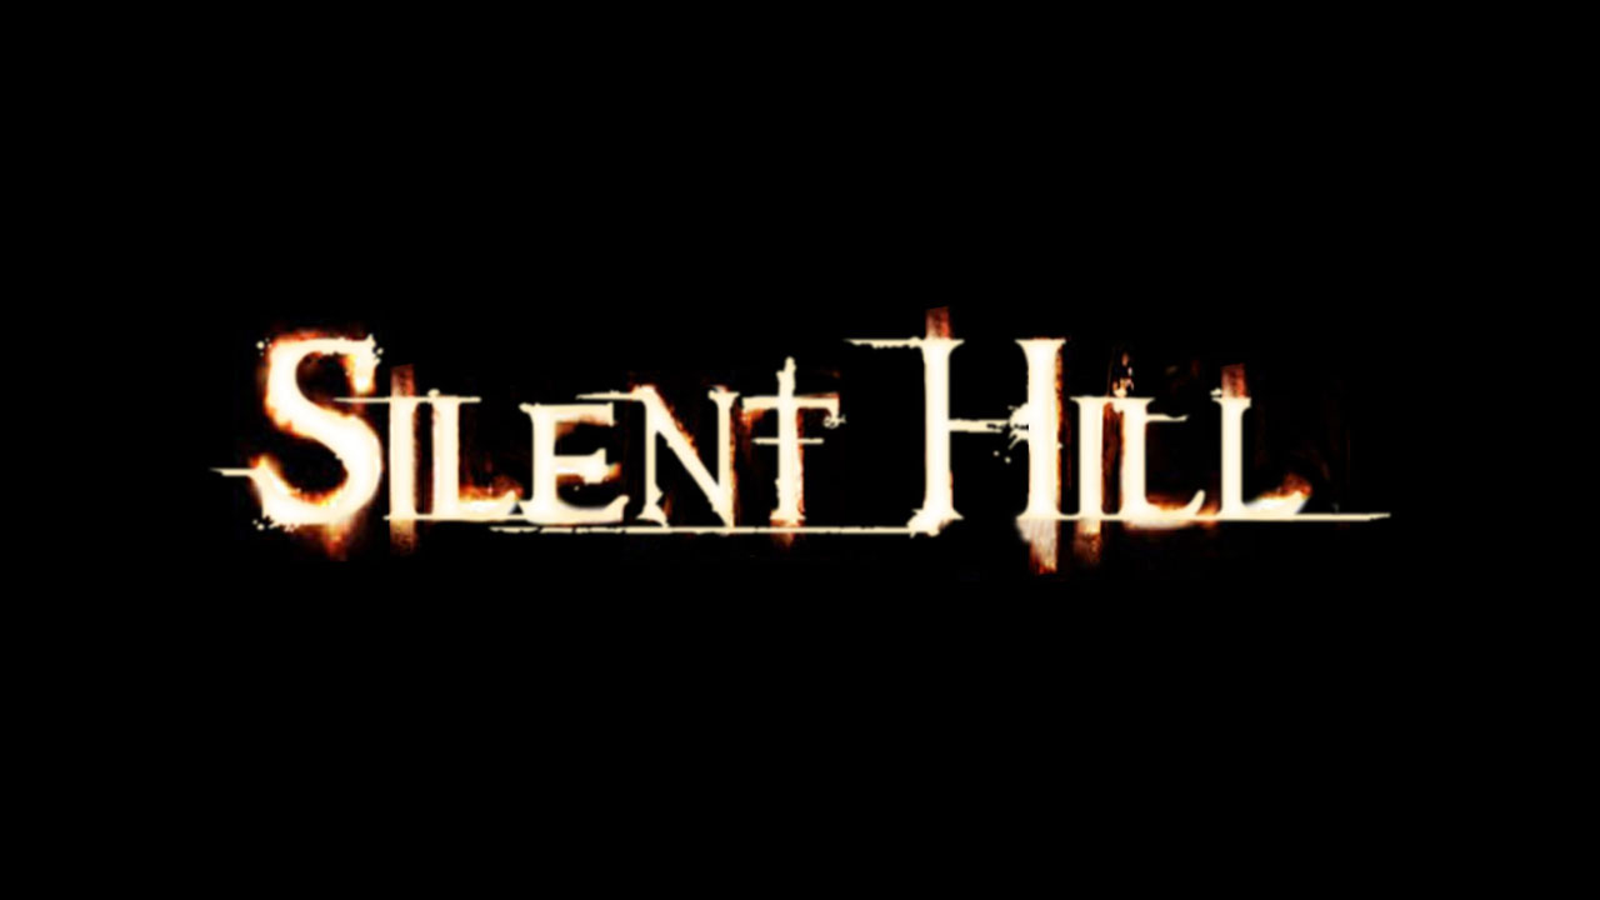 Silent Hill's return shows Konami is taking games seriously again - Polygon